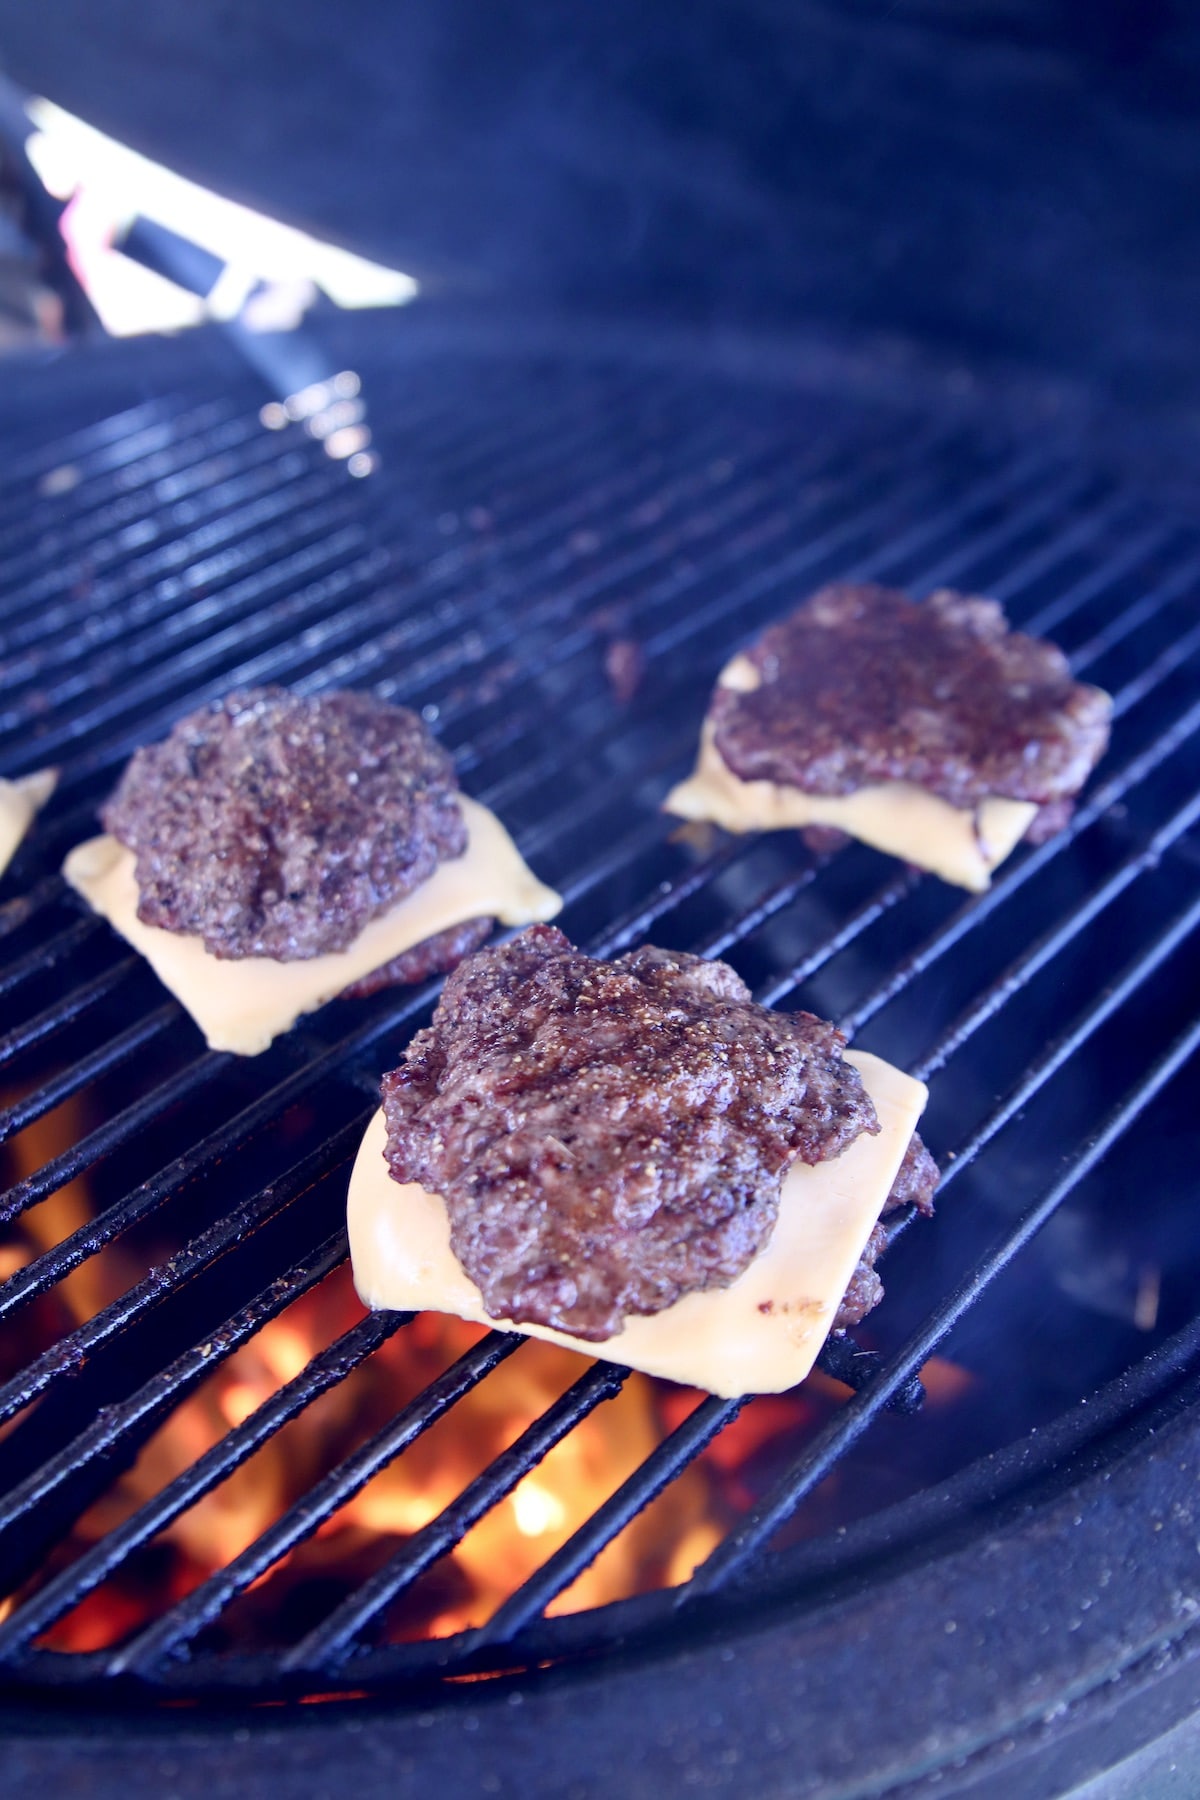 Burger sliders with cheese on a grill.